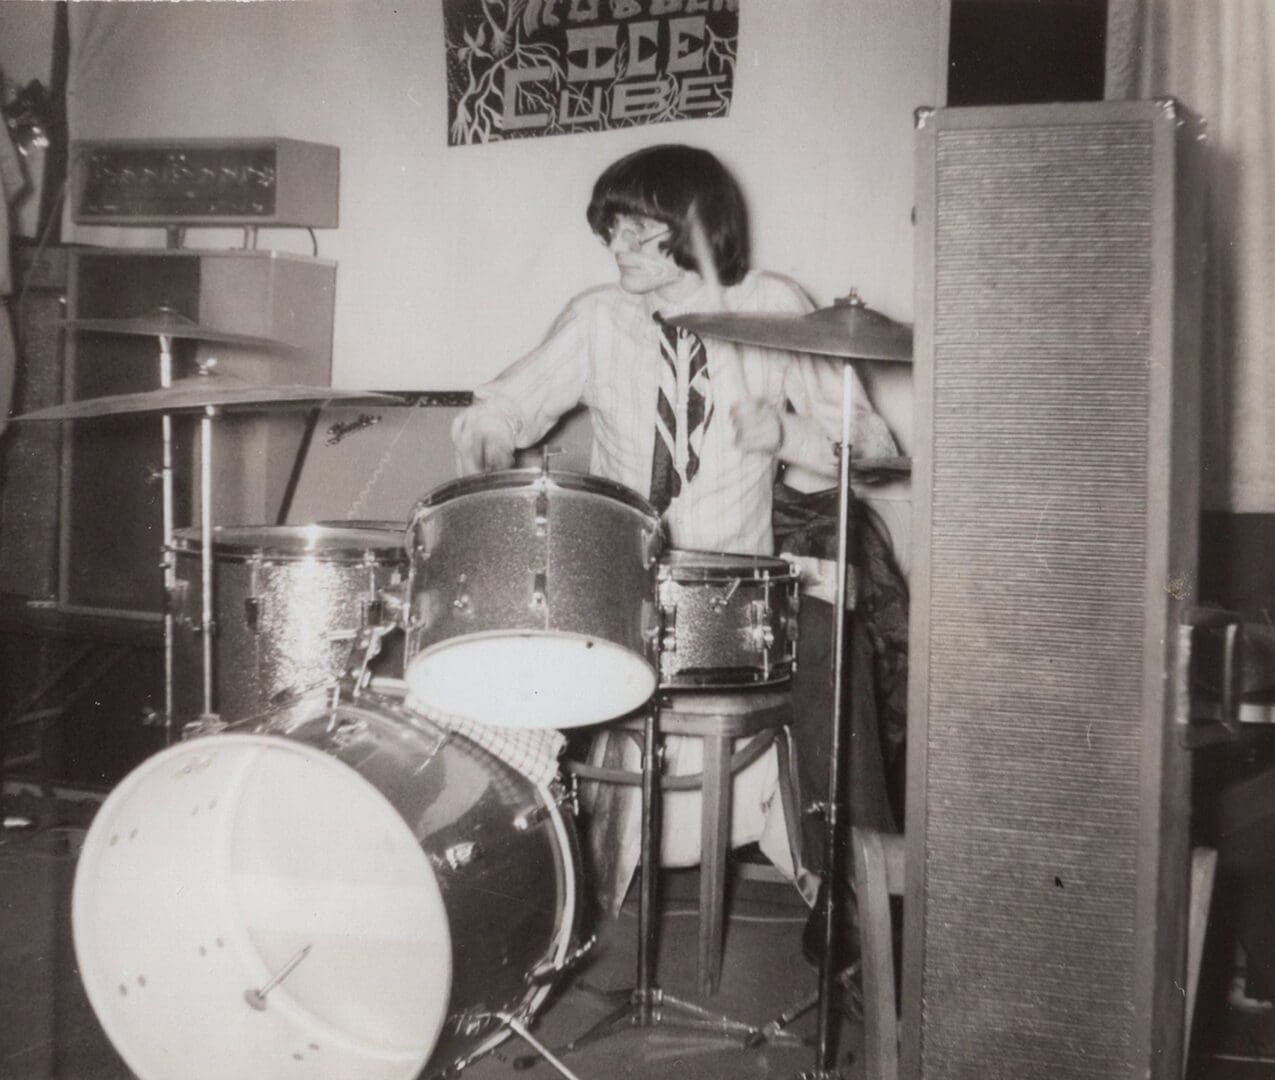 A young boy playing drums in his room.